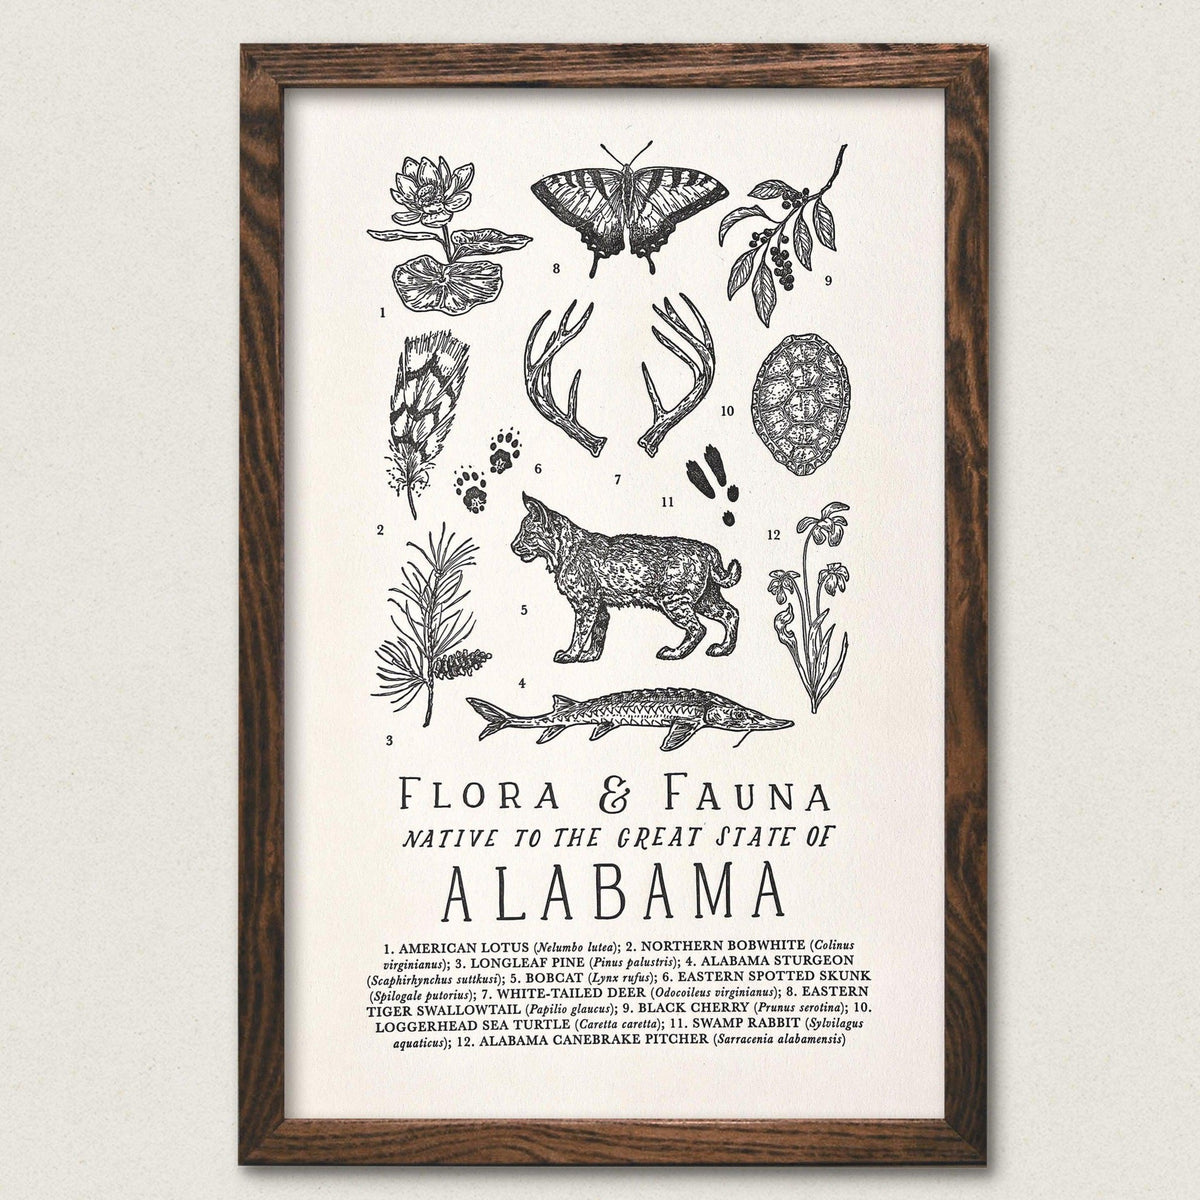 The Wild Wander&#39;s Alabama Field Guide Letterpress Art Print featuring plants and animals from the region.